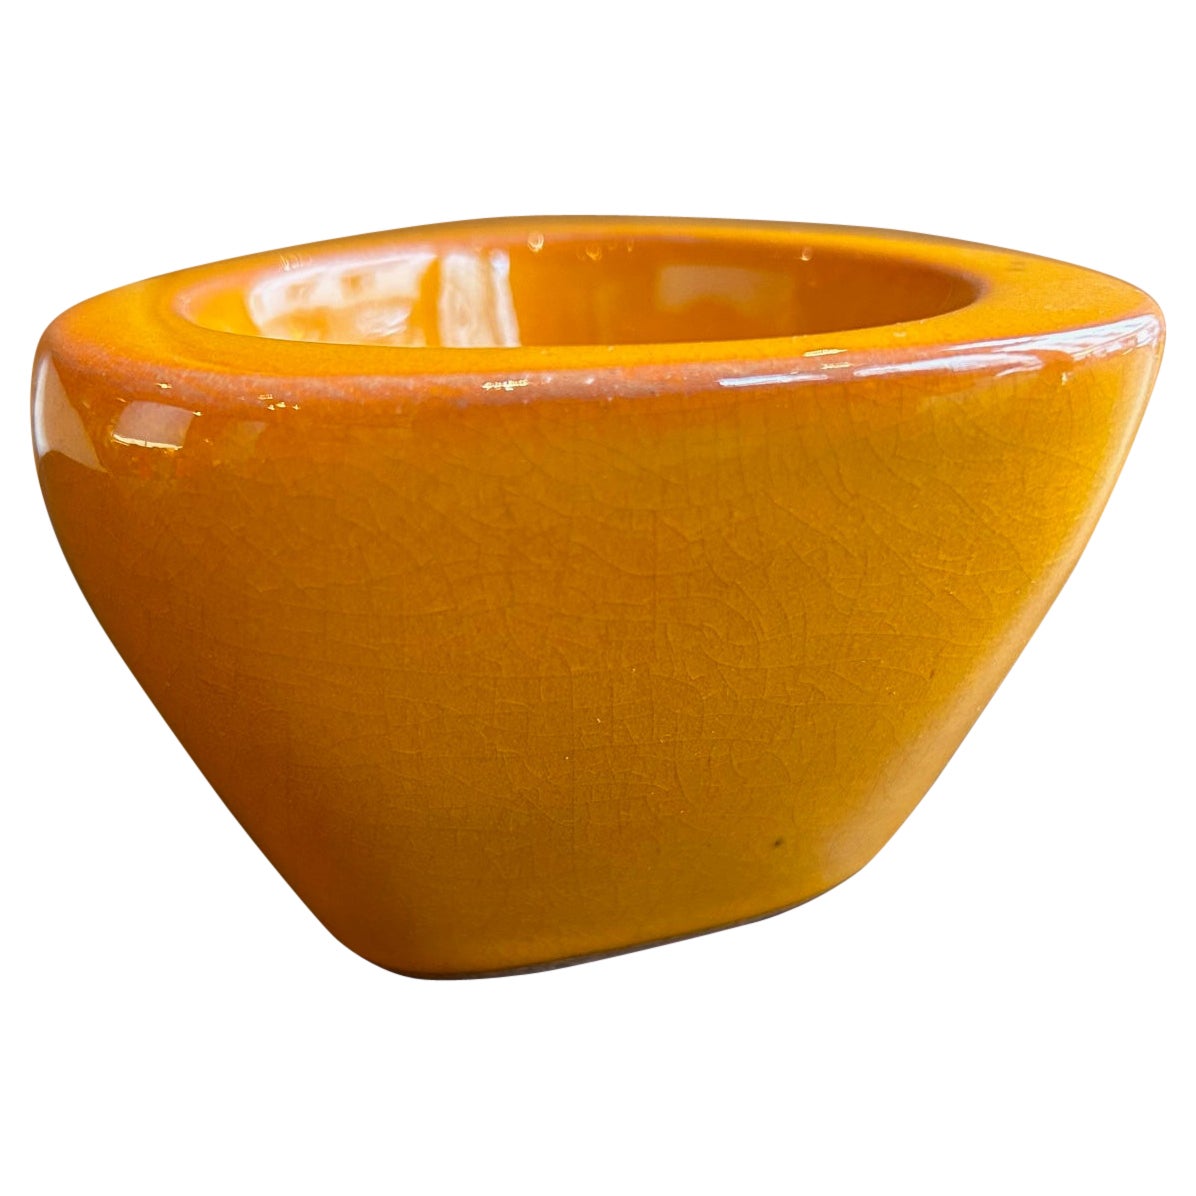 Ceramic Ashtray/Bowl "Galet" by Georges Jouve, France, 1950s For Sale